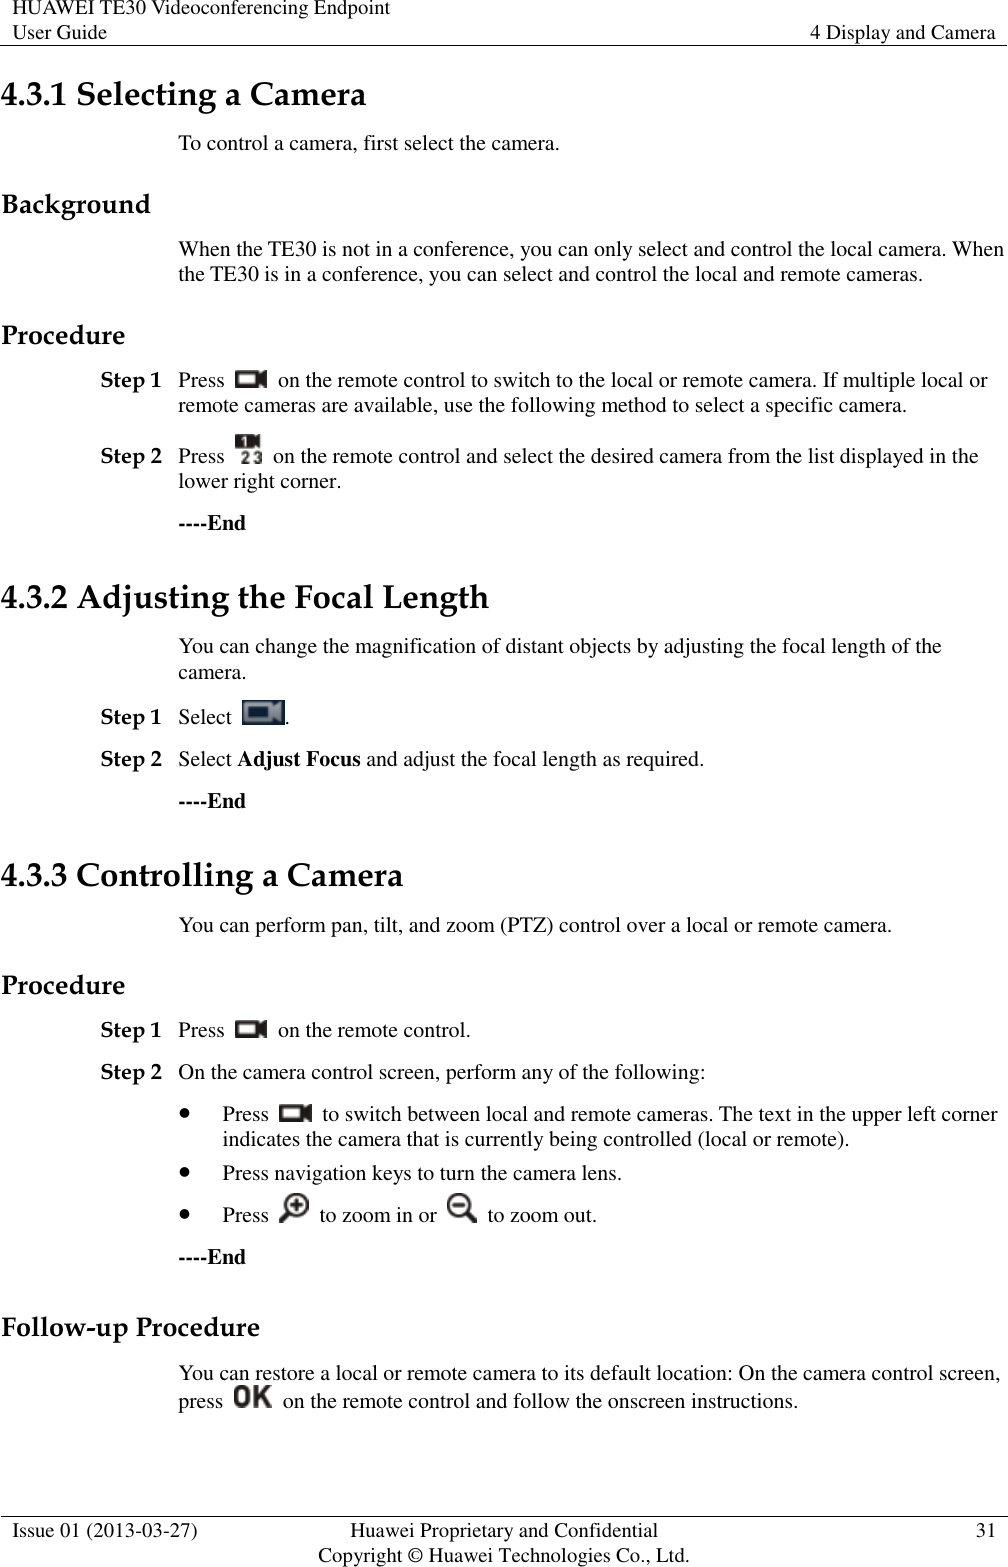 HUAWEI TE30 Videoconferencing Endpoint User Guide 4 Display and Camera  Issue 01 (2013-03-27) Huawei Proprietary and Confidential                                     Copyright © Huawei Technologies Co., Ltd. 31  4.3.1 Selecting a Camera To control a camera, first select the camera. Background When the TE30 is not in a conference, you can only select and control the local camera. When the TE30 is in a conference, you can select and control the local and remote cameras. Procedure Step 1 Press    on the remote control to switch to the local or remote camera. If multiple local or remote cameras are available, use the following method to select a specific camera. Step 2 Press    on the remote control and select the desired camera from the list displayed in the lower right corner. ----End 4.3.2 Adjusting the Focal Length You can change the magnification of distant objects by adjusting the focal length of the camera. Step 1 Select  . Step 2 Select Adjust Focus and adjust the focal length as required. ----End 4.3.3 Controlling a Camera You can perform pan, tilt, and zoom (PTZ) control over a local or remote camera. Procedure Step 1 Press    on the remote control. Step 2 On the camera control screen, perform any of the following:  Press    to switch between local and remote cameras. The text in the upper left corner indicates the camera that is currently being controlled (local or remote).  Press navigation keys to turn the camera lens.  Press    to zoom in or    to zoom out. ----End Follow-up Procedure You can restore a local or remote camera to its default location: On the camera control screen, press    on the remote control and follow the onscreen instructions. 